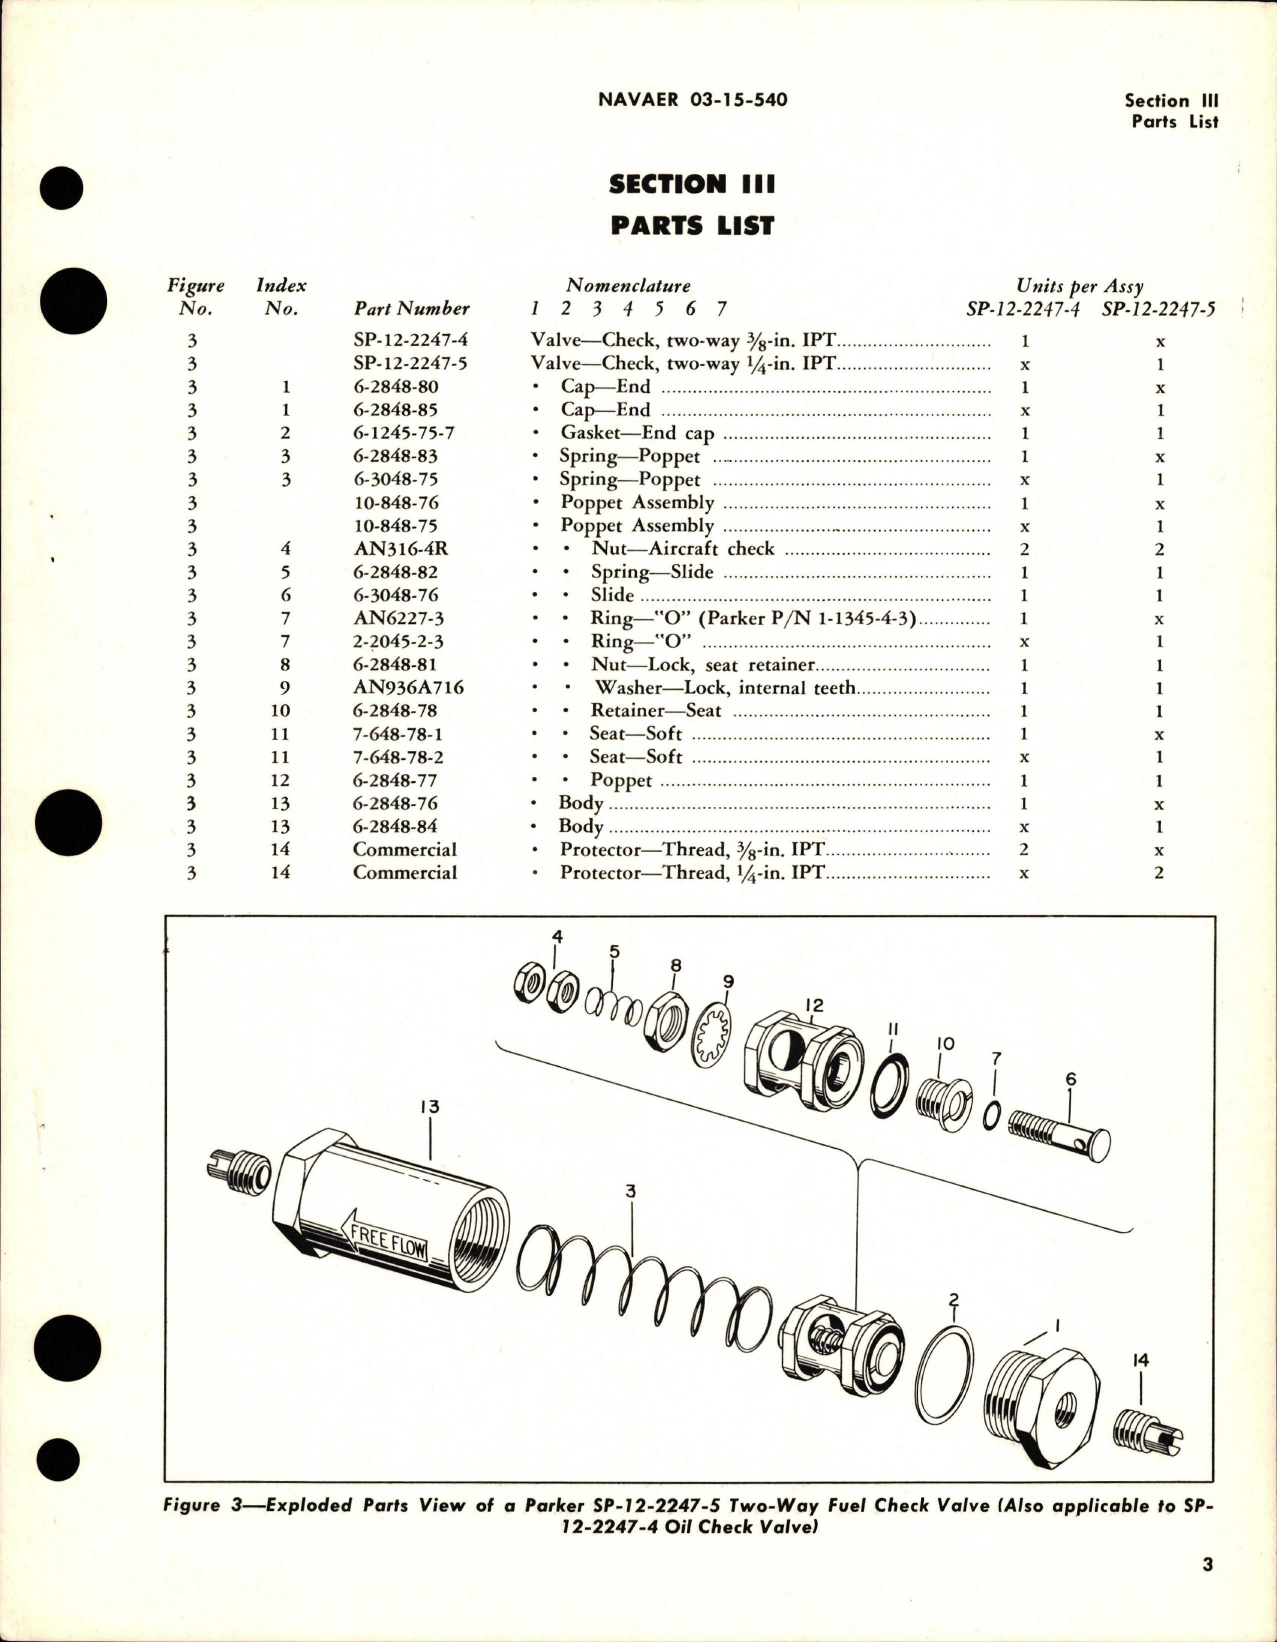 Sample page 5 from AirCorps Library document: Operation, Service, Overhaul Instructions with Parts for Two Way Oil Check Valve - SP-12-2247-4, and Two Way Fuel Check Valve - SP-12-2247-5